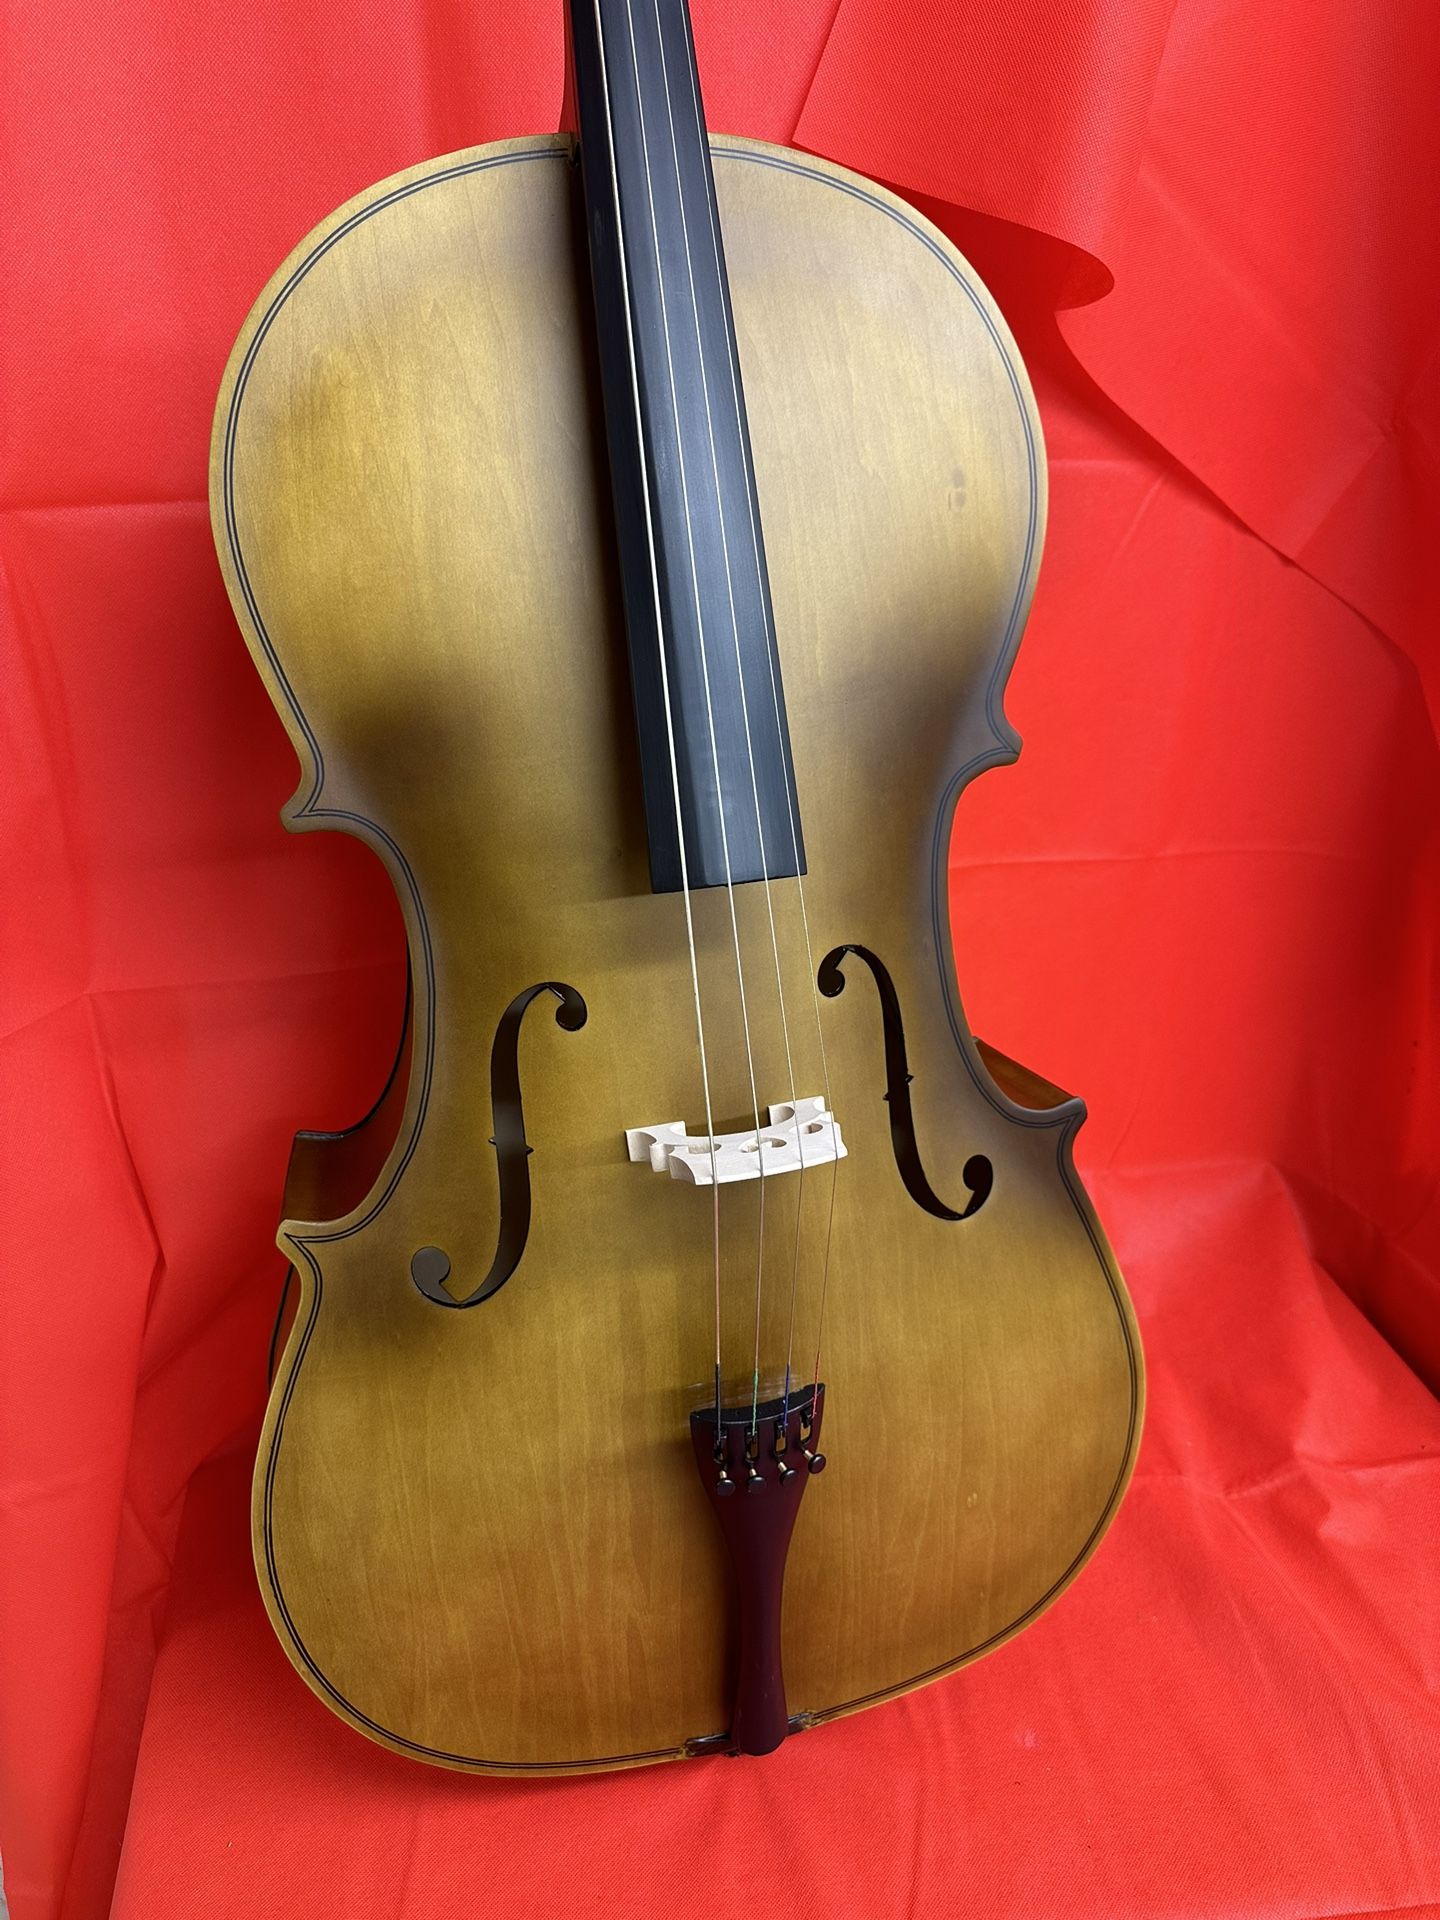 4/4 Full Size Matte Brown Cello with New Bow, Digital Tuner, Rosin, Case $380 Firm